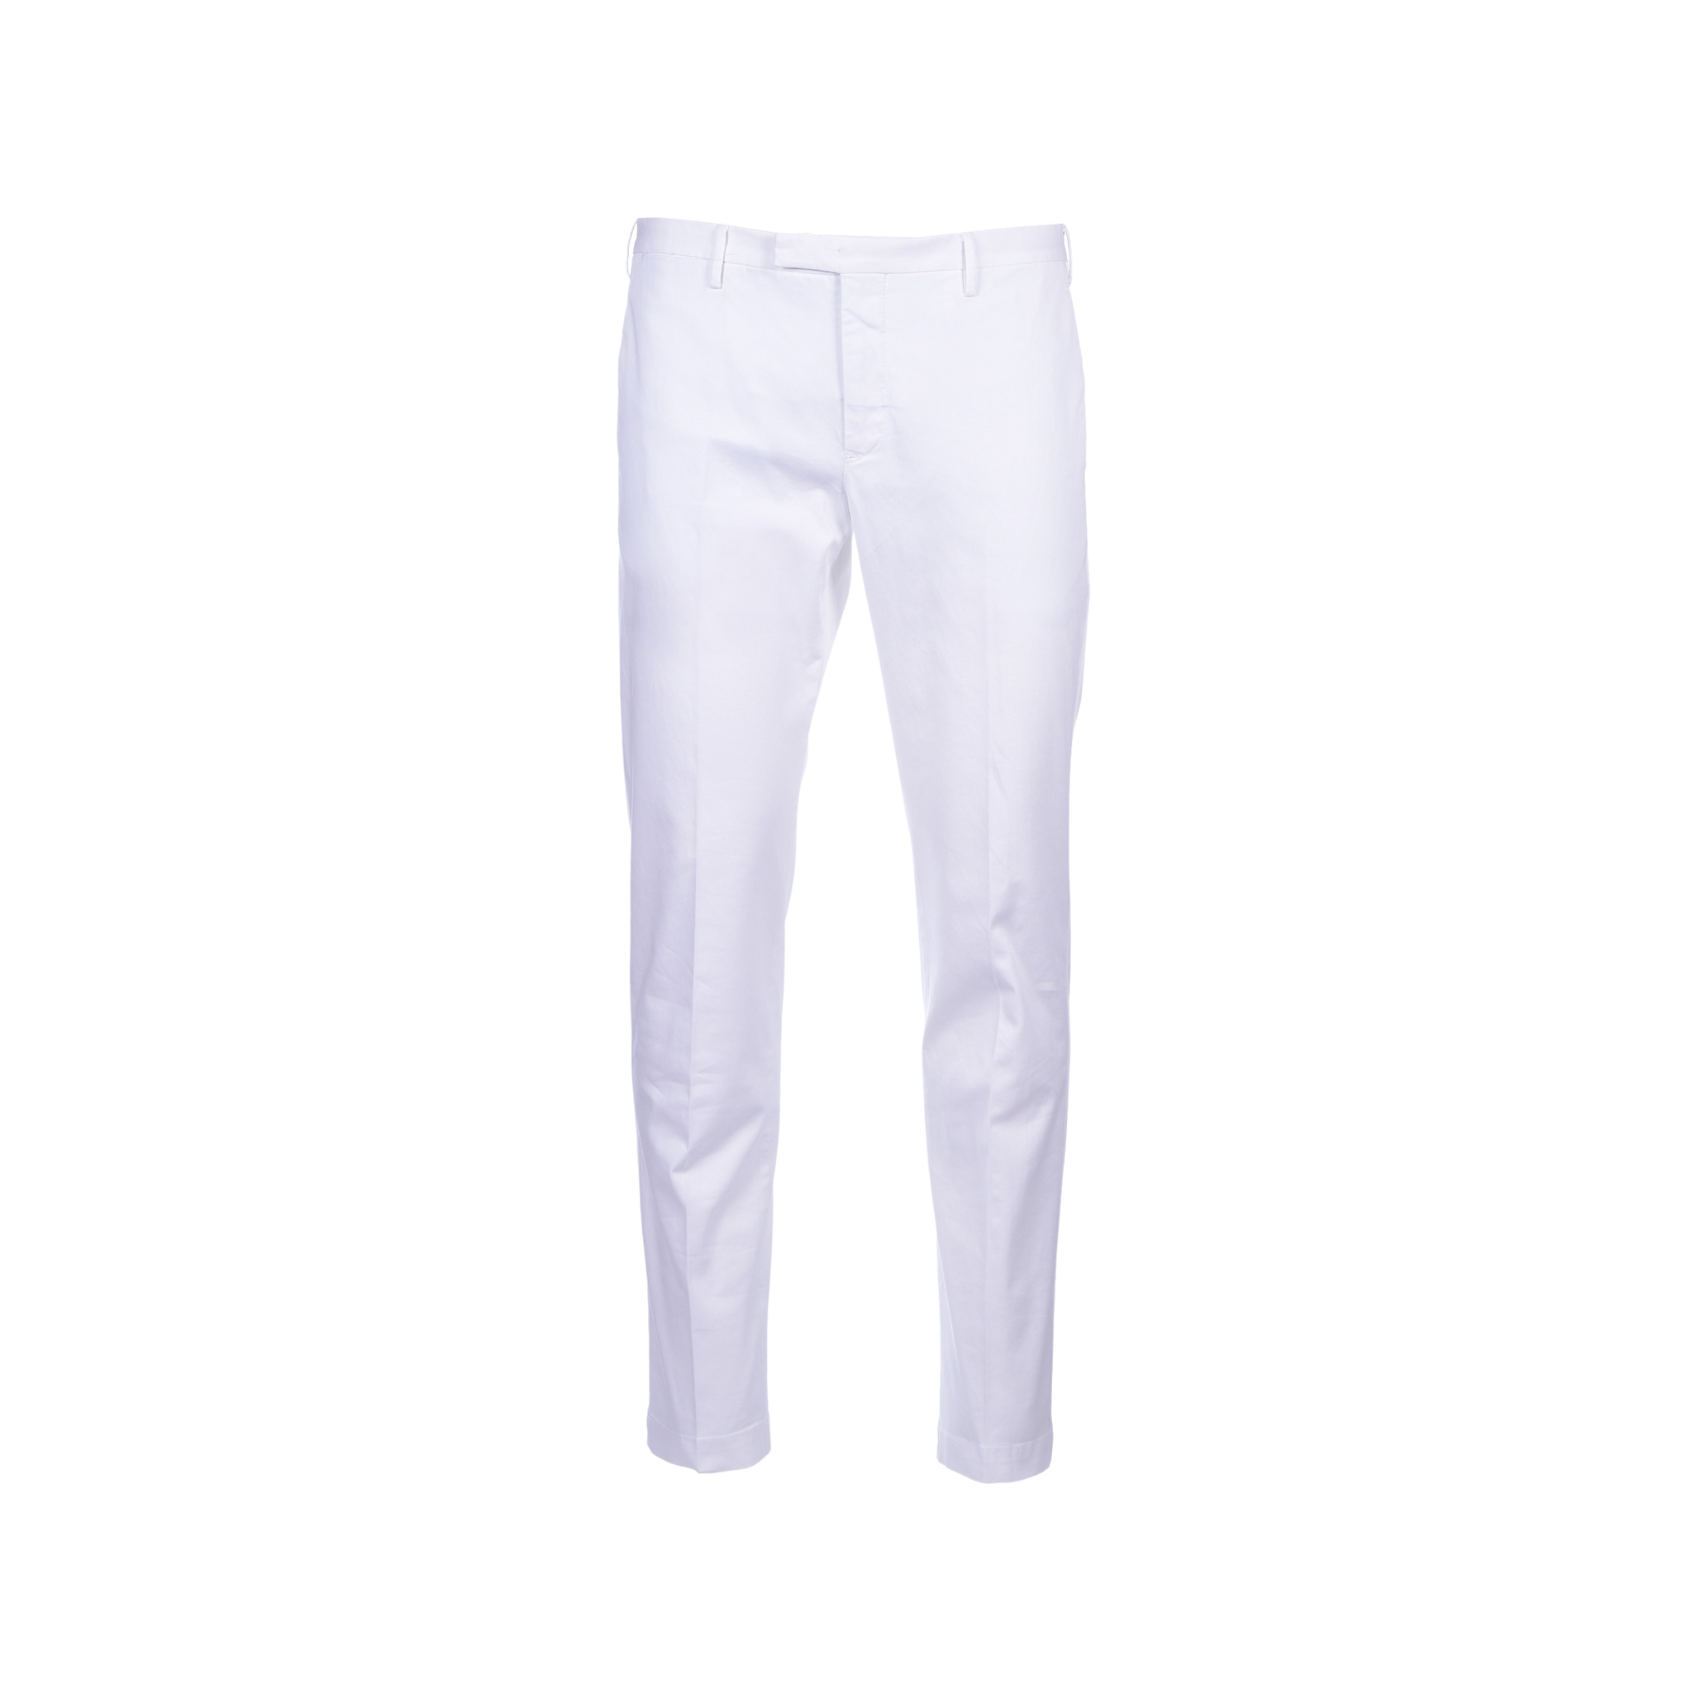 Skinny-fit Trousers - White